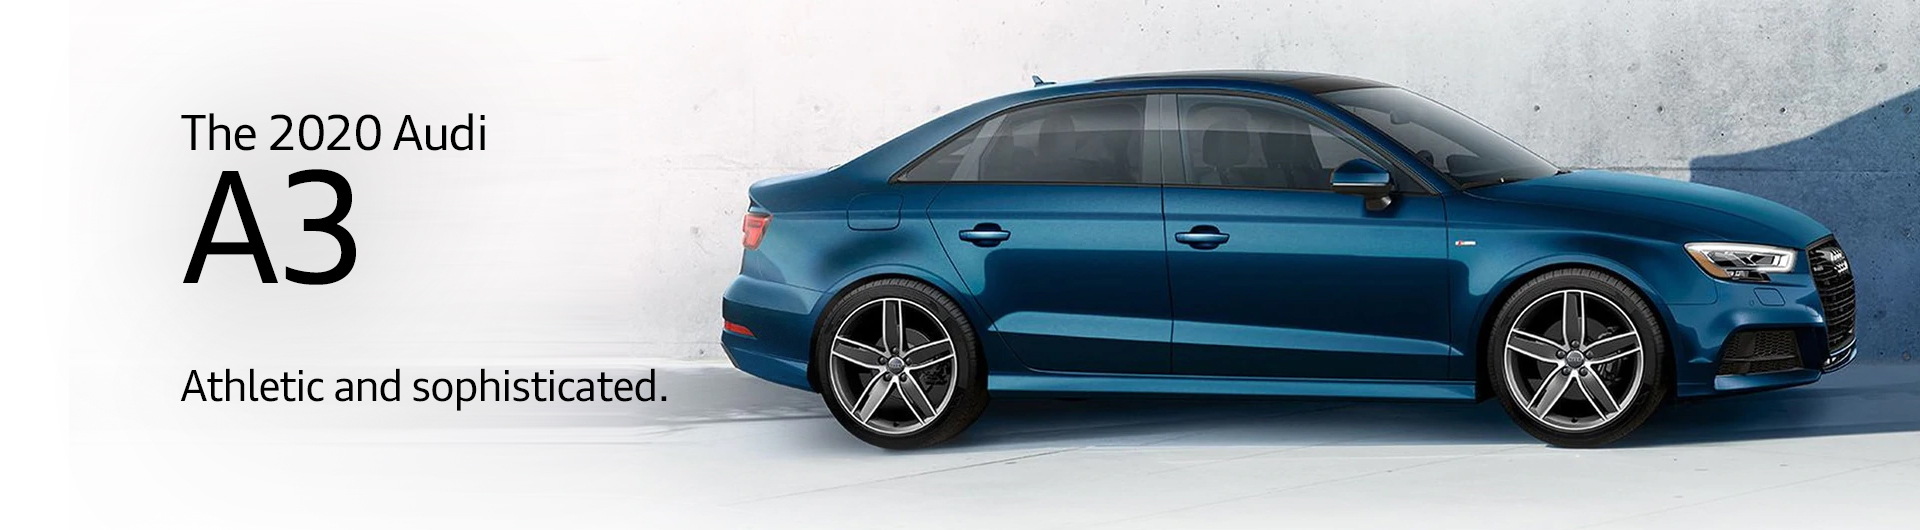 This is the all-new Audi A3 Saloon